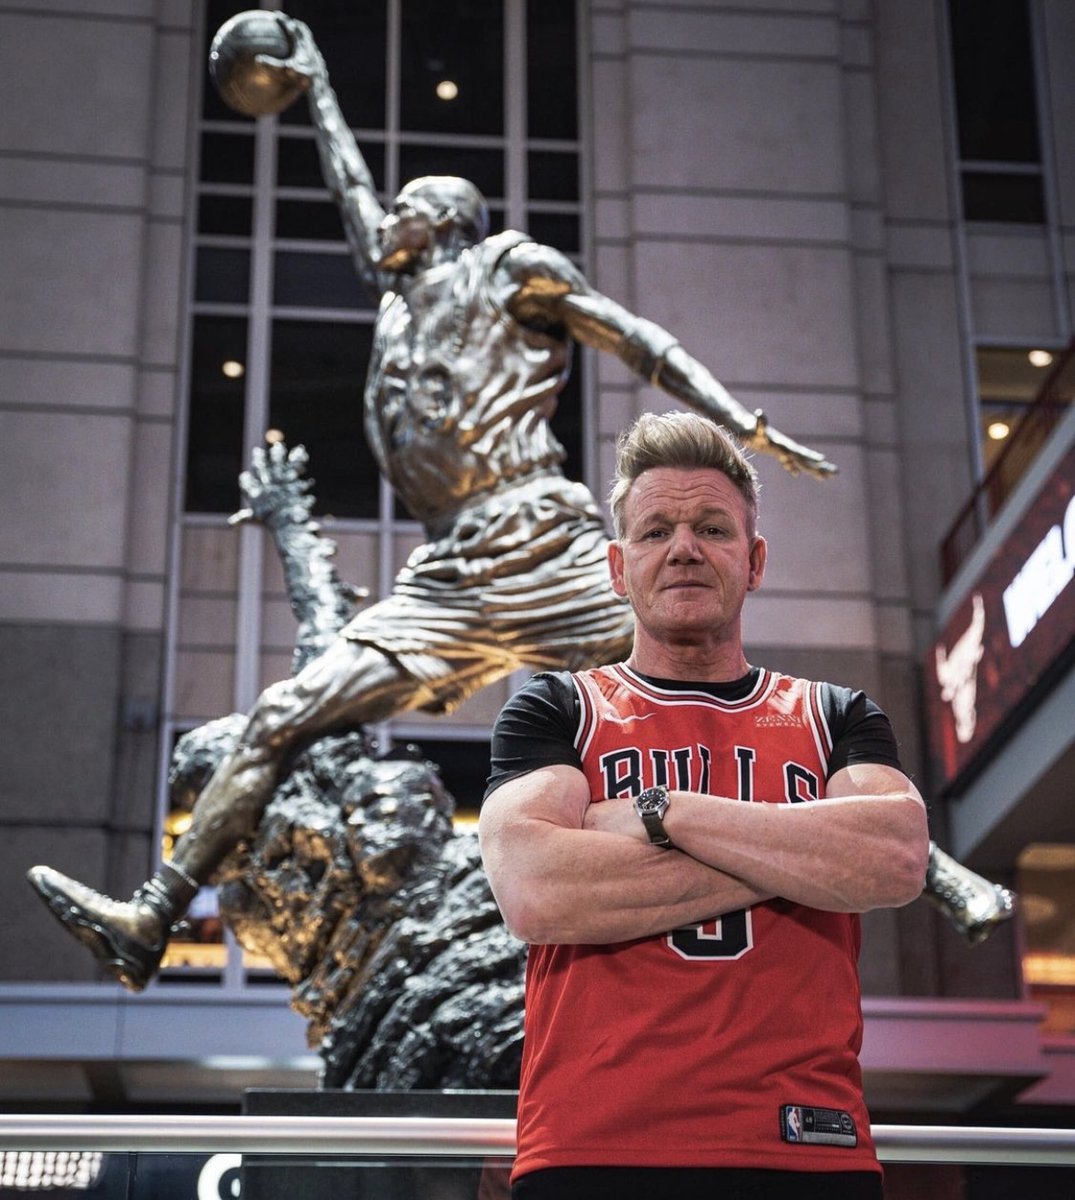 RT @NBAMemes: BREAKING: Bulls sign Gordon Ramsay as the team’s official chef, adding another jersey in the rafters https://t.co/W2QcQlIMUN